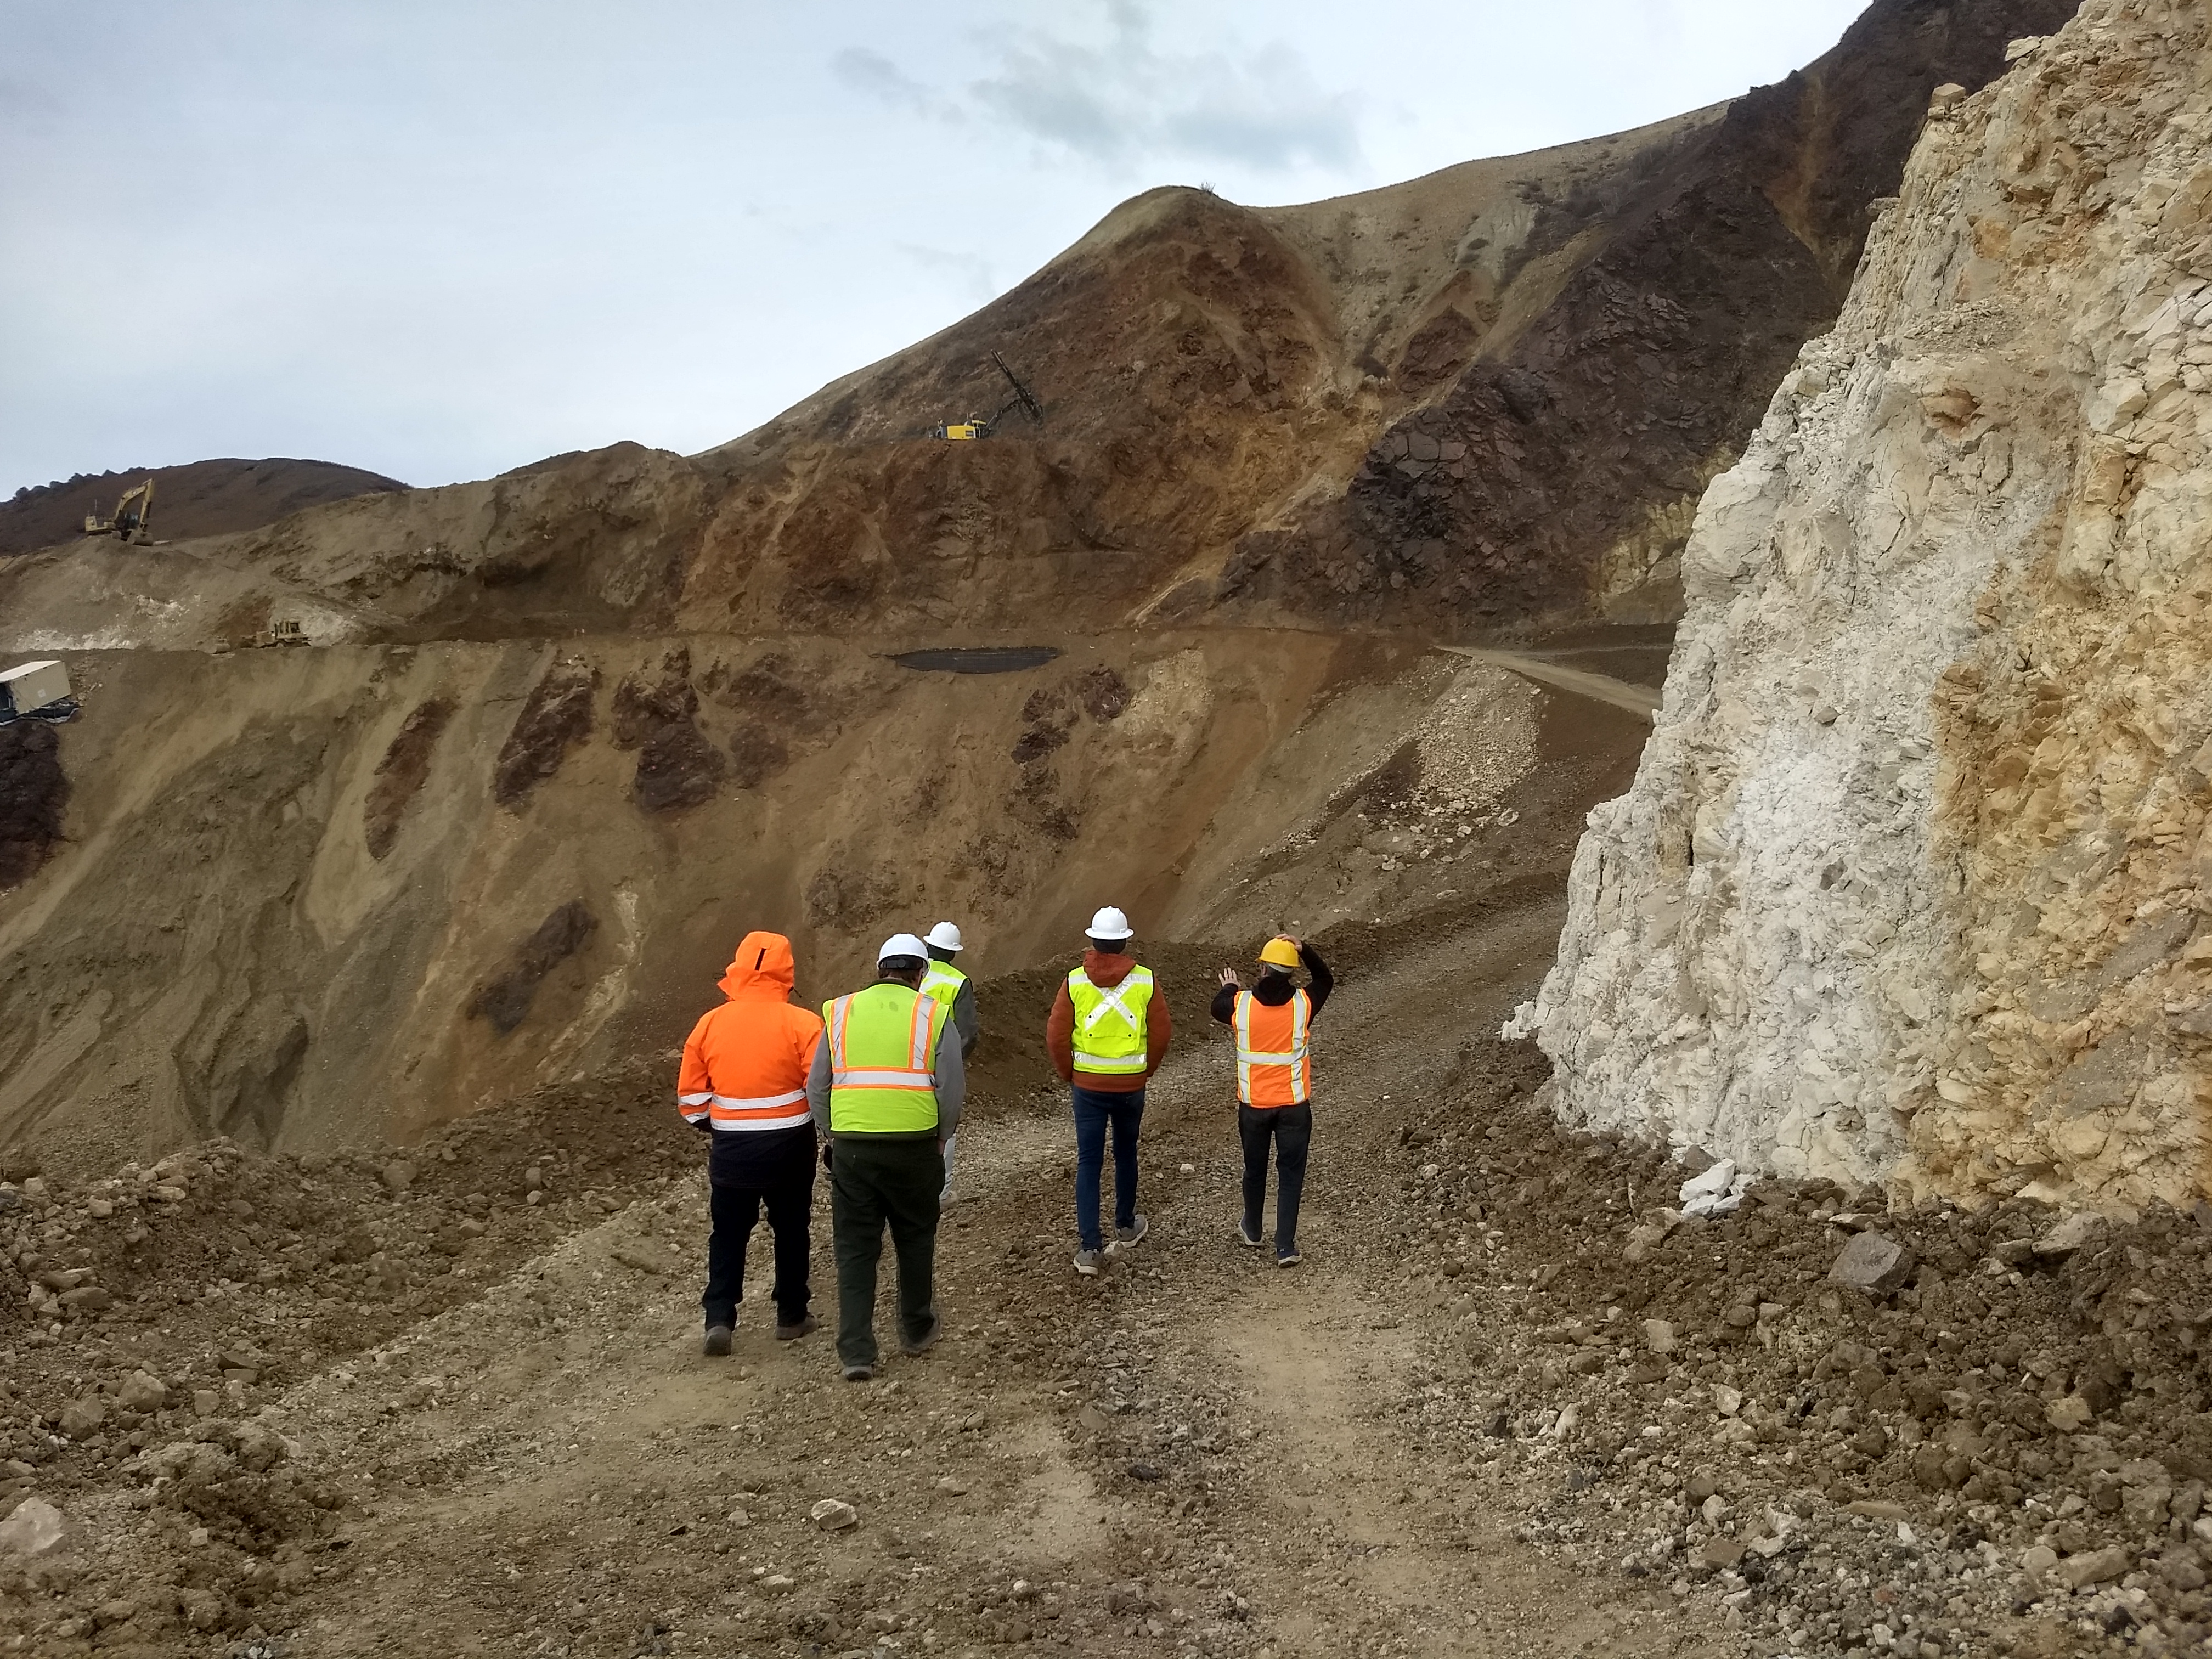 Five people in safety vests and hard hats walk toward the west side of the landslide where several pieces of construction equipment can be seen working.